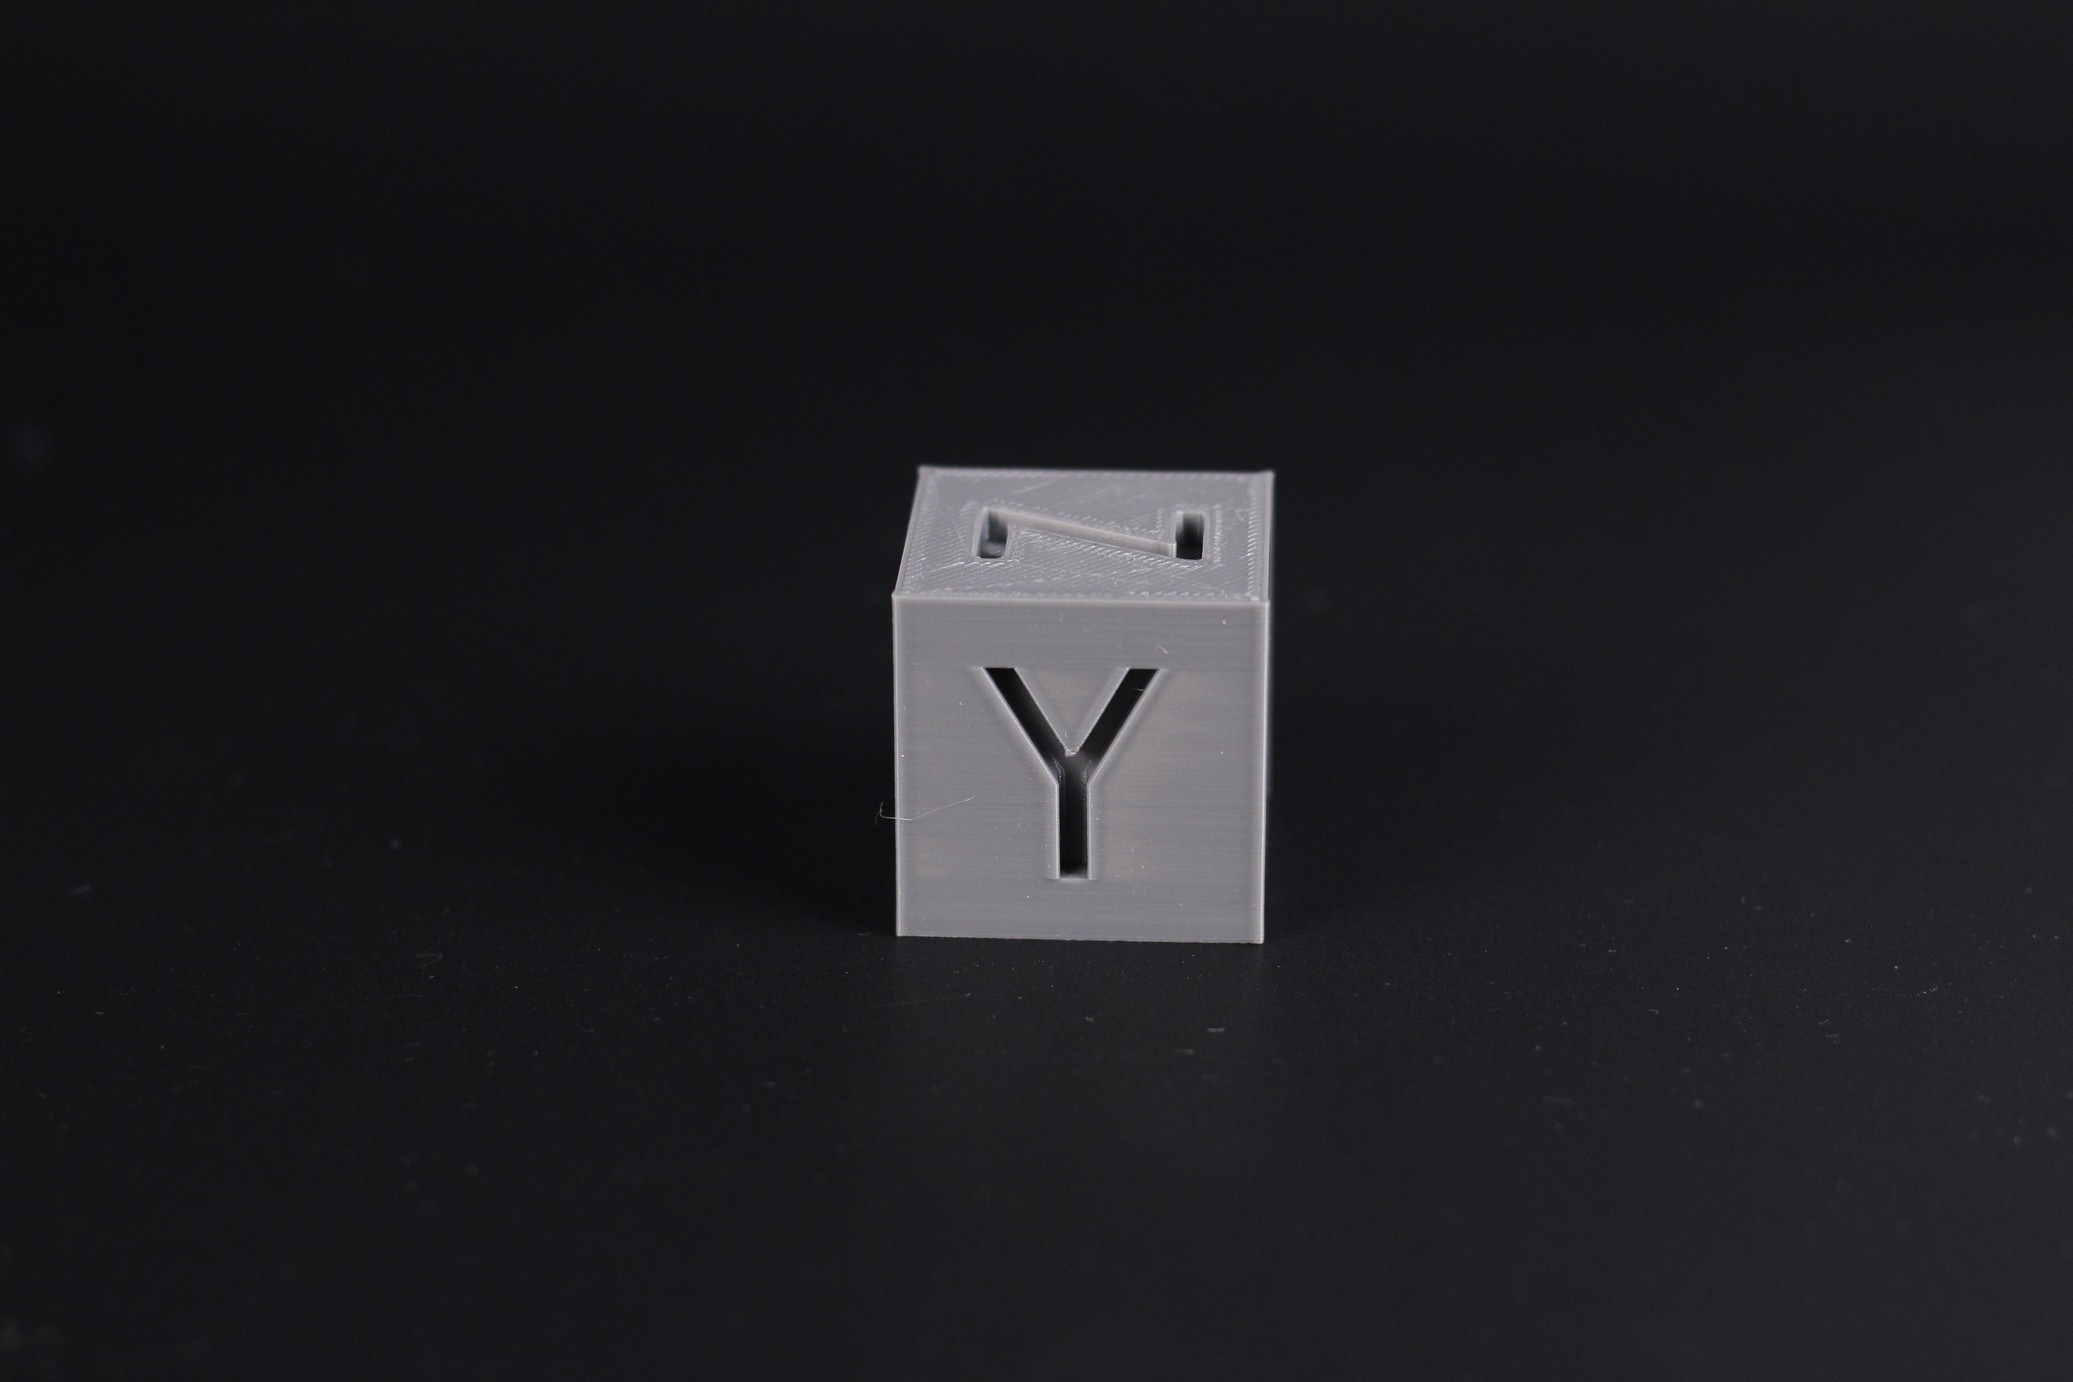 Anycubic Kobra 200 calibration cube 4 | Anycubic Kobra Review: The New Budget Standard